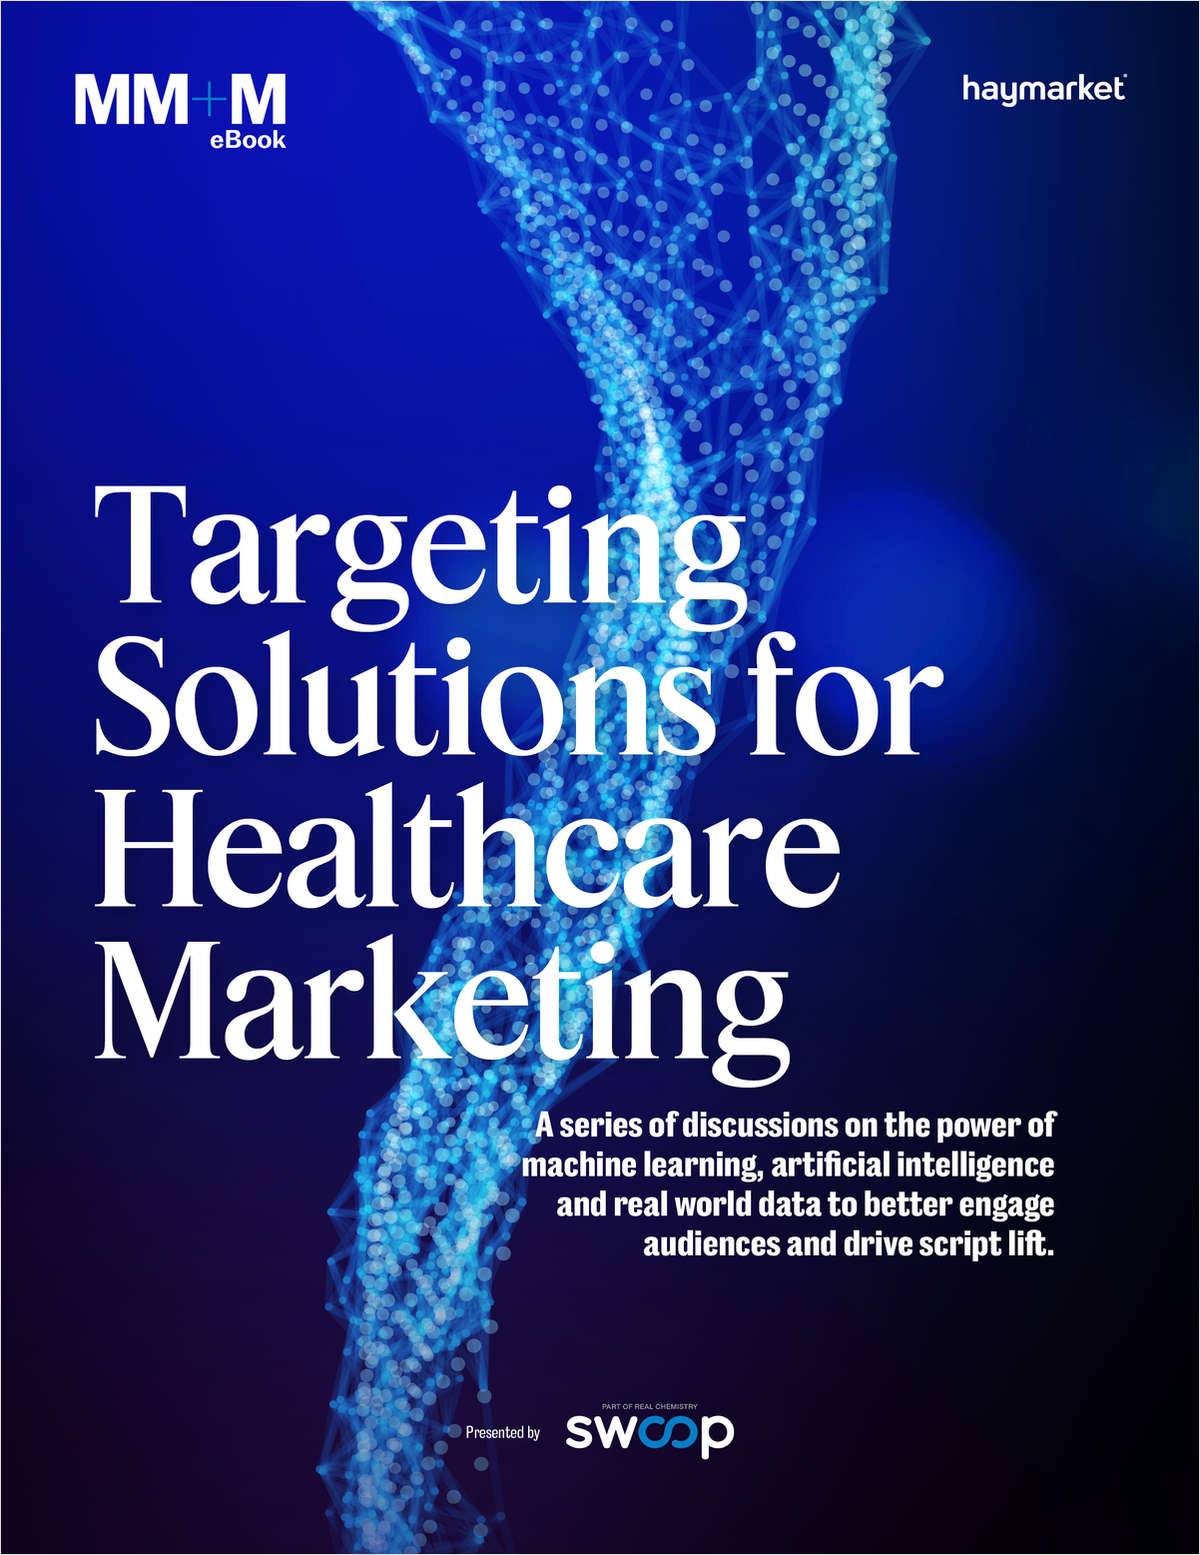 Targeting Solutions for Healthcare Marketing